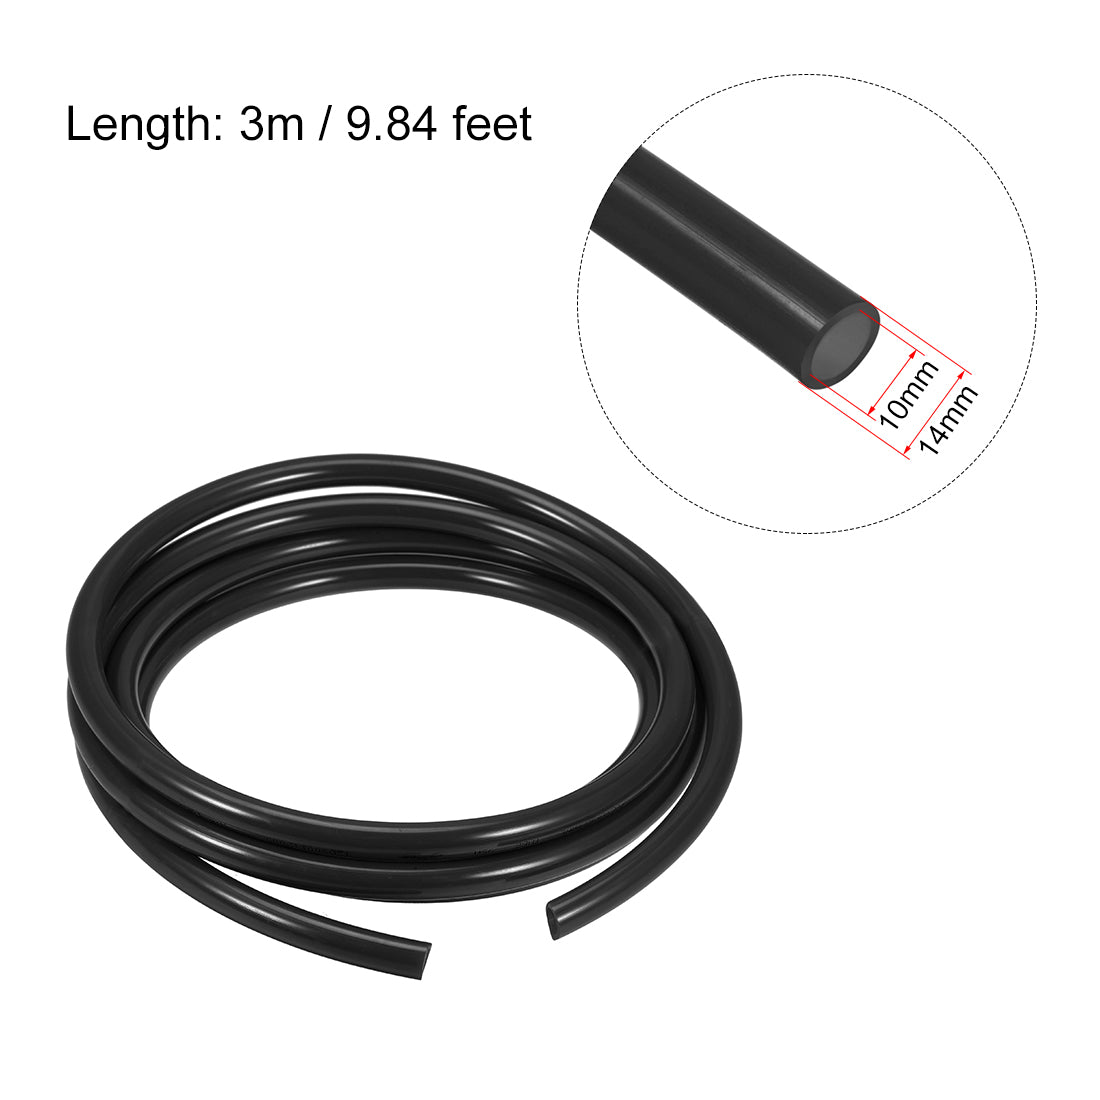 Uxcell Uxcell 14mm OD 10mm ID 1m Long Black PU Air Tubing Pipe Hose for Air Line Tube Fluid Transfer Pneumatic Tubing